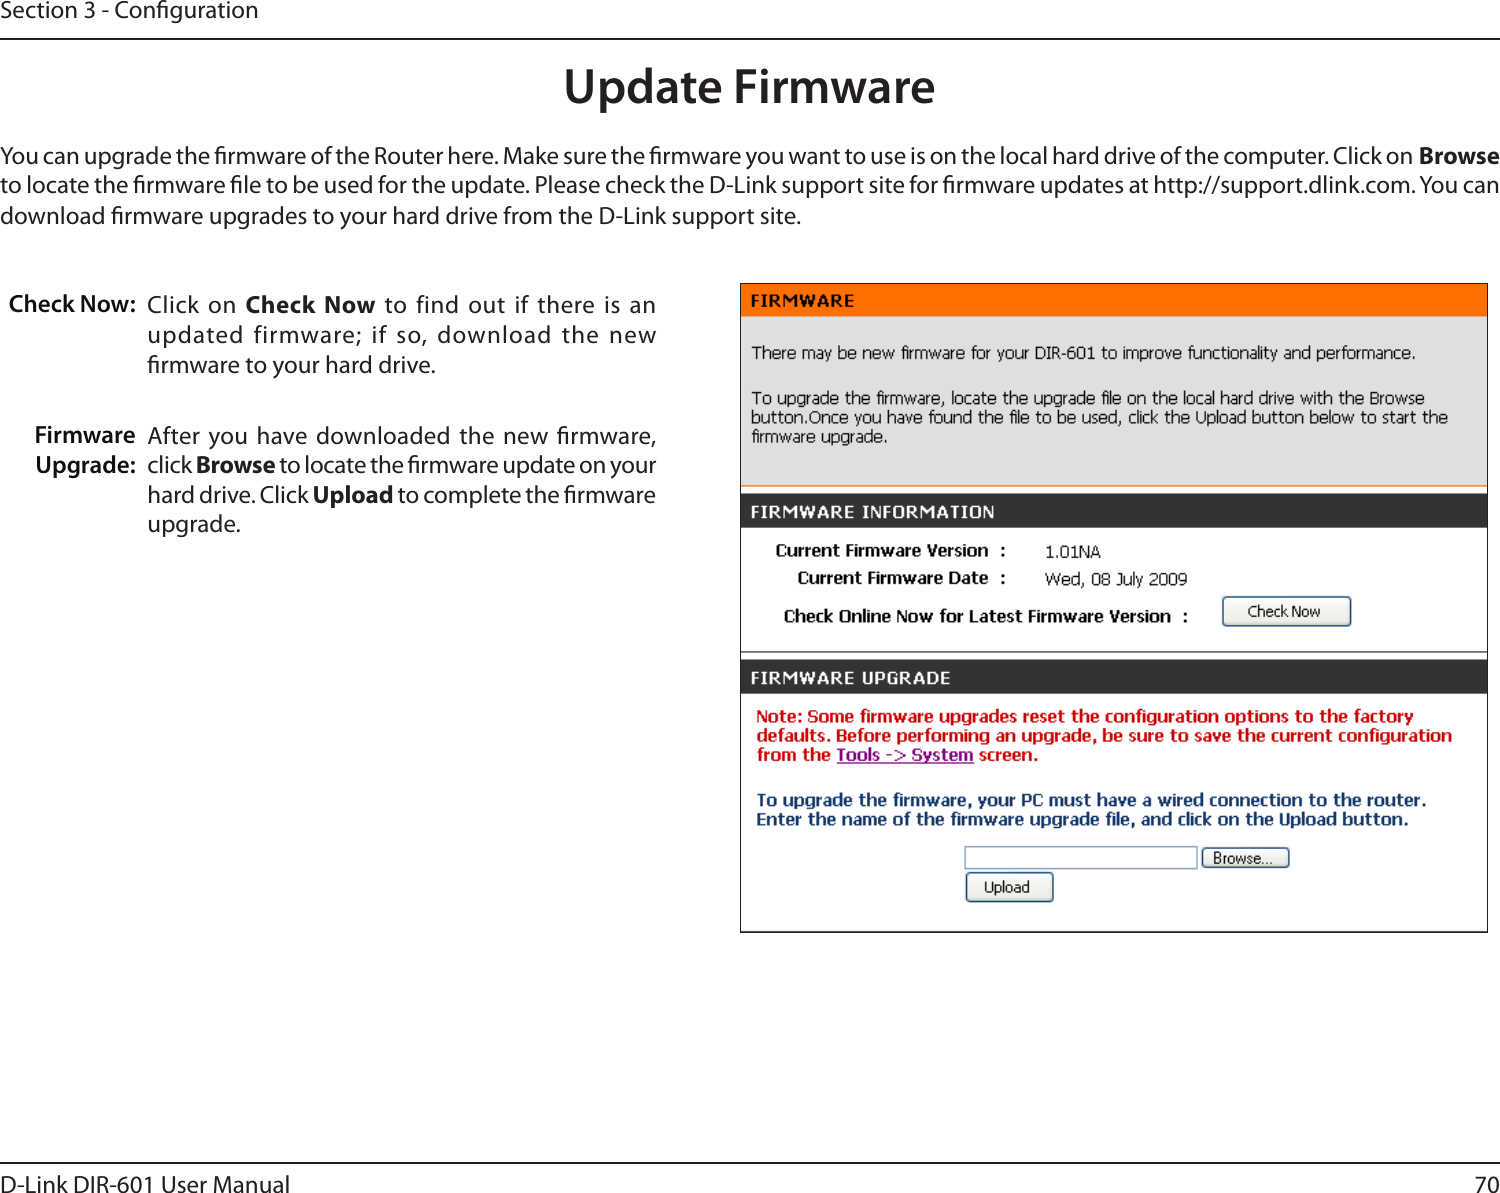 70D-Link DIR-601 User ManualSection 3 - CongurationClick on  Check  Now to  find out if  there is an updated firmware; if so, download the  new rmware to your hard drive.After you have downloaded  the new  rmware, click Browse to locate the rmware update on your hard drive. Click Upload to complete the rmware upgrade.Check Now: Firmware Upgrade:Update FirmwareYou can upgrade the rmware of the Router here. Make sure the rmware you want to use is on the local hard drive of the computer. Click on Browse to locate the rmware le to be used for the update. Please check the D-Link support site for rmware updates at http://support.dlink.com. You can download rmware upgrades to your hard drive from the D-Link support site.